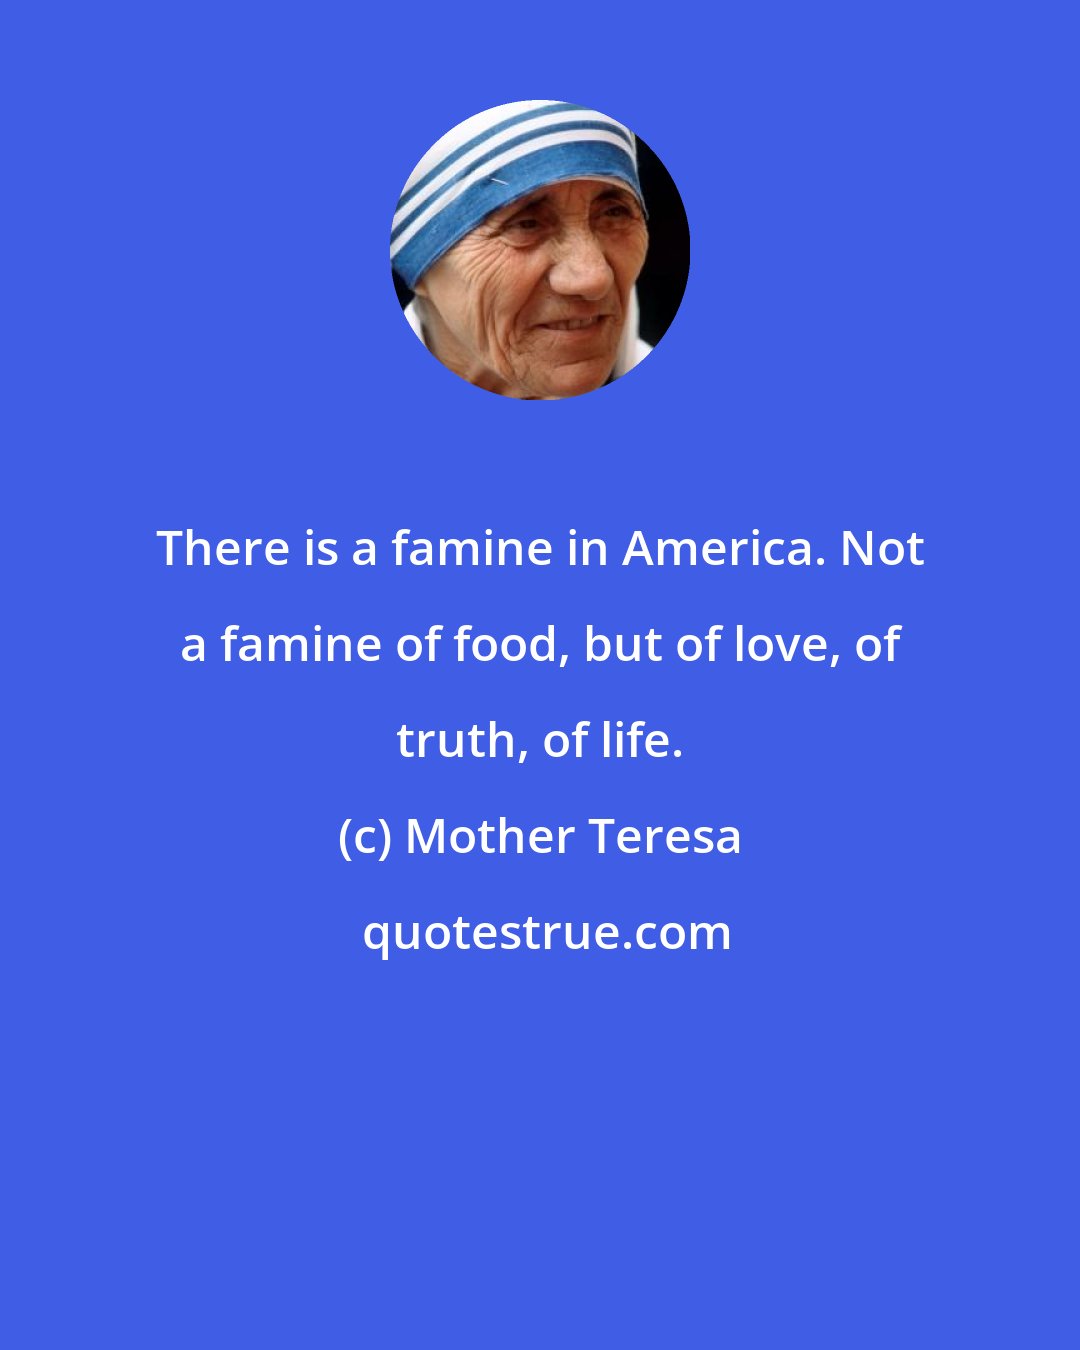 Mother Teresa: There is a famine in America. Not a famine of food, but of love, of truth, of life.